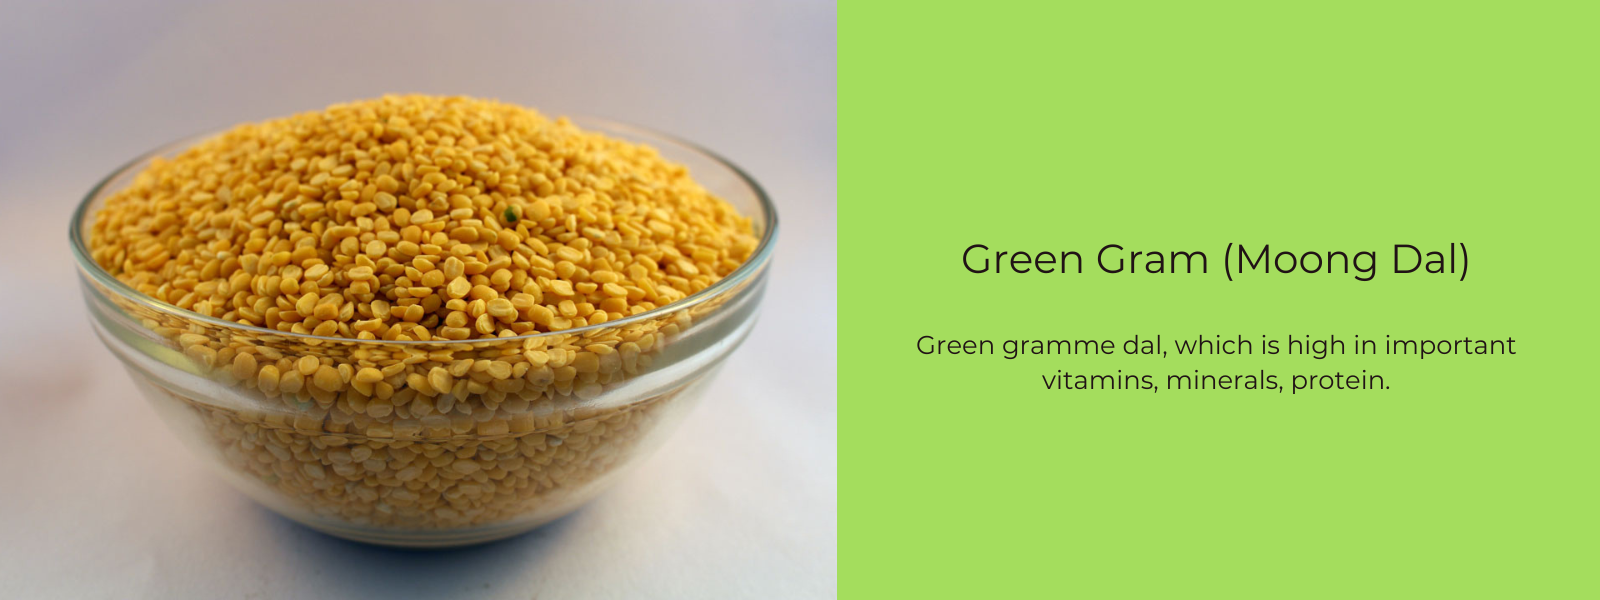 Green Gram (Moong Dal) – Health Benefits, Uses and Important Facts